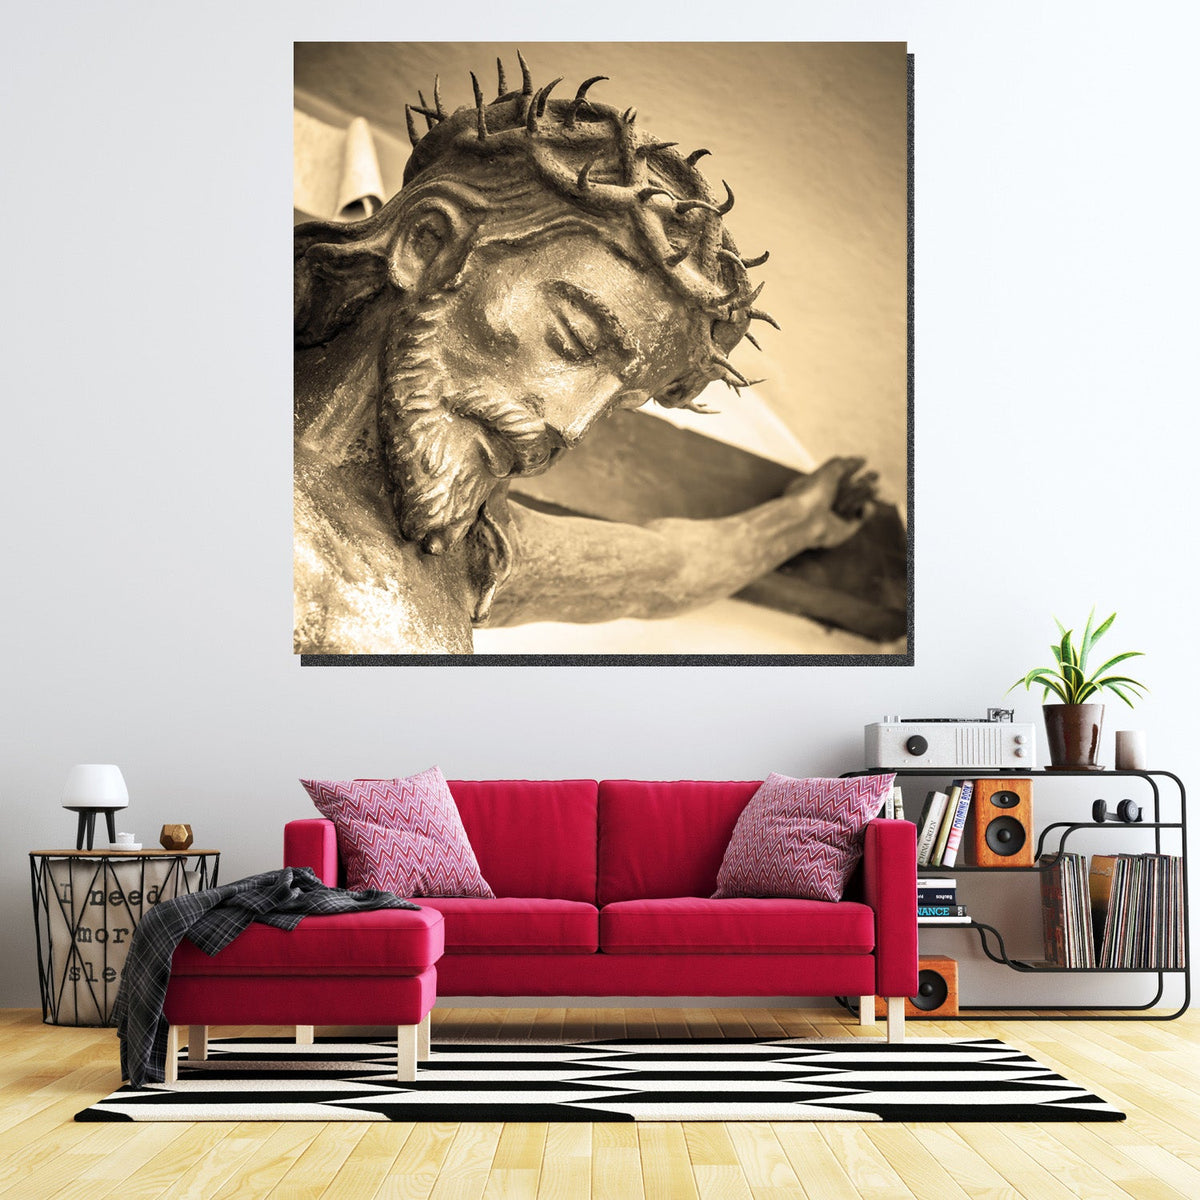 https://cdn.shopify.com/s/files/1/0387/9986/8044/products/StatueofChristCanvasArtprintStretched-3.jpg